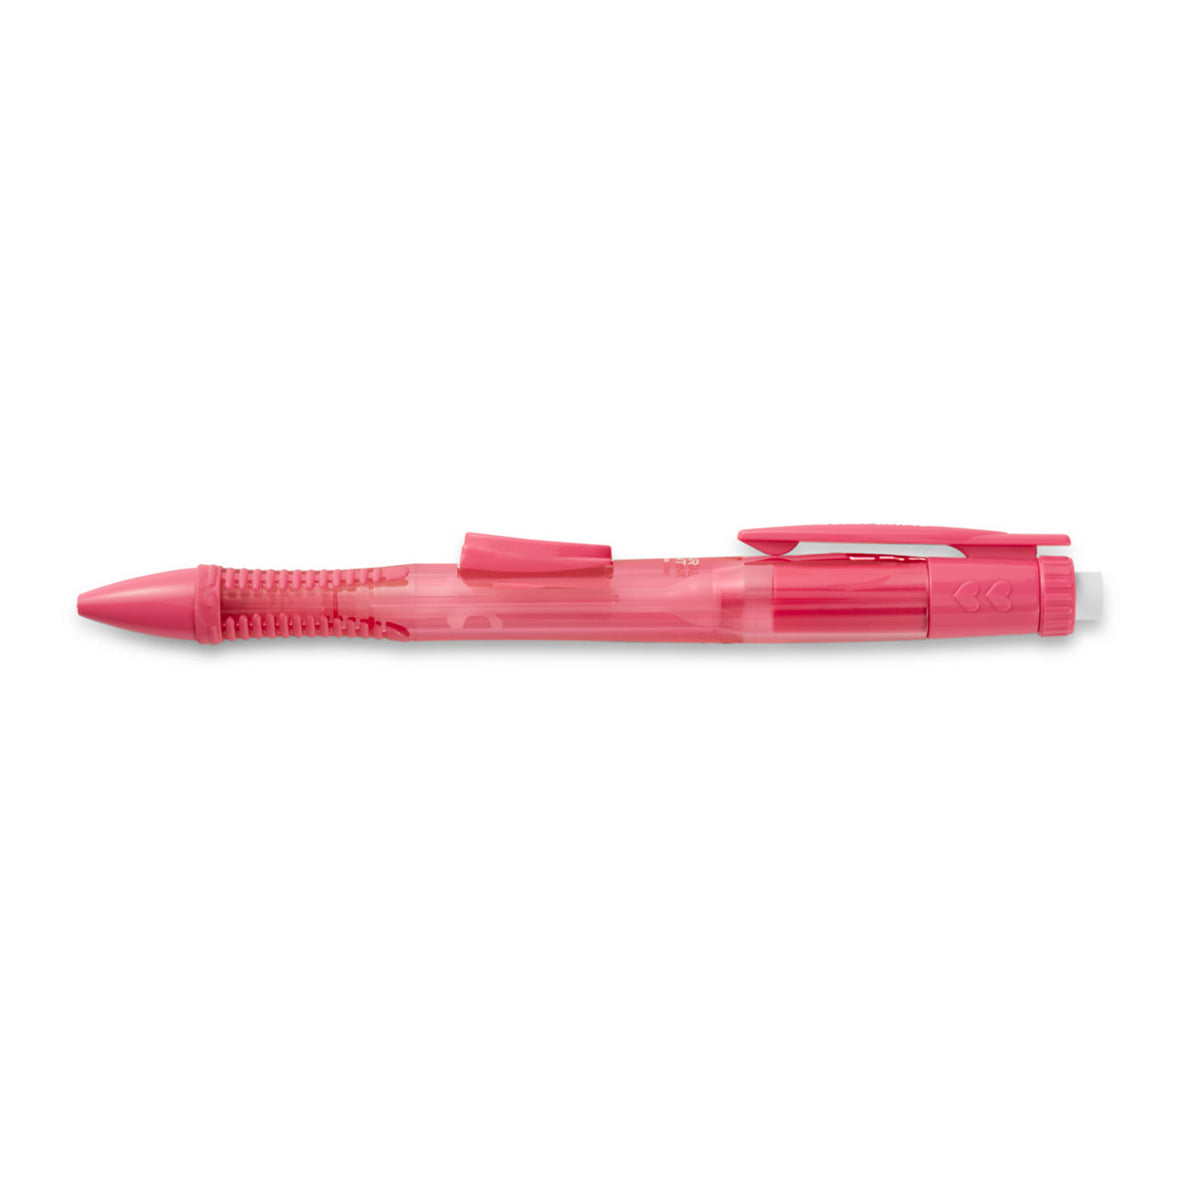 Papermate Clearpoint Pink Lead Pencil 0.7MM (Pink Lead)  Paper Mate Pencil